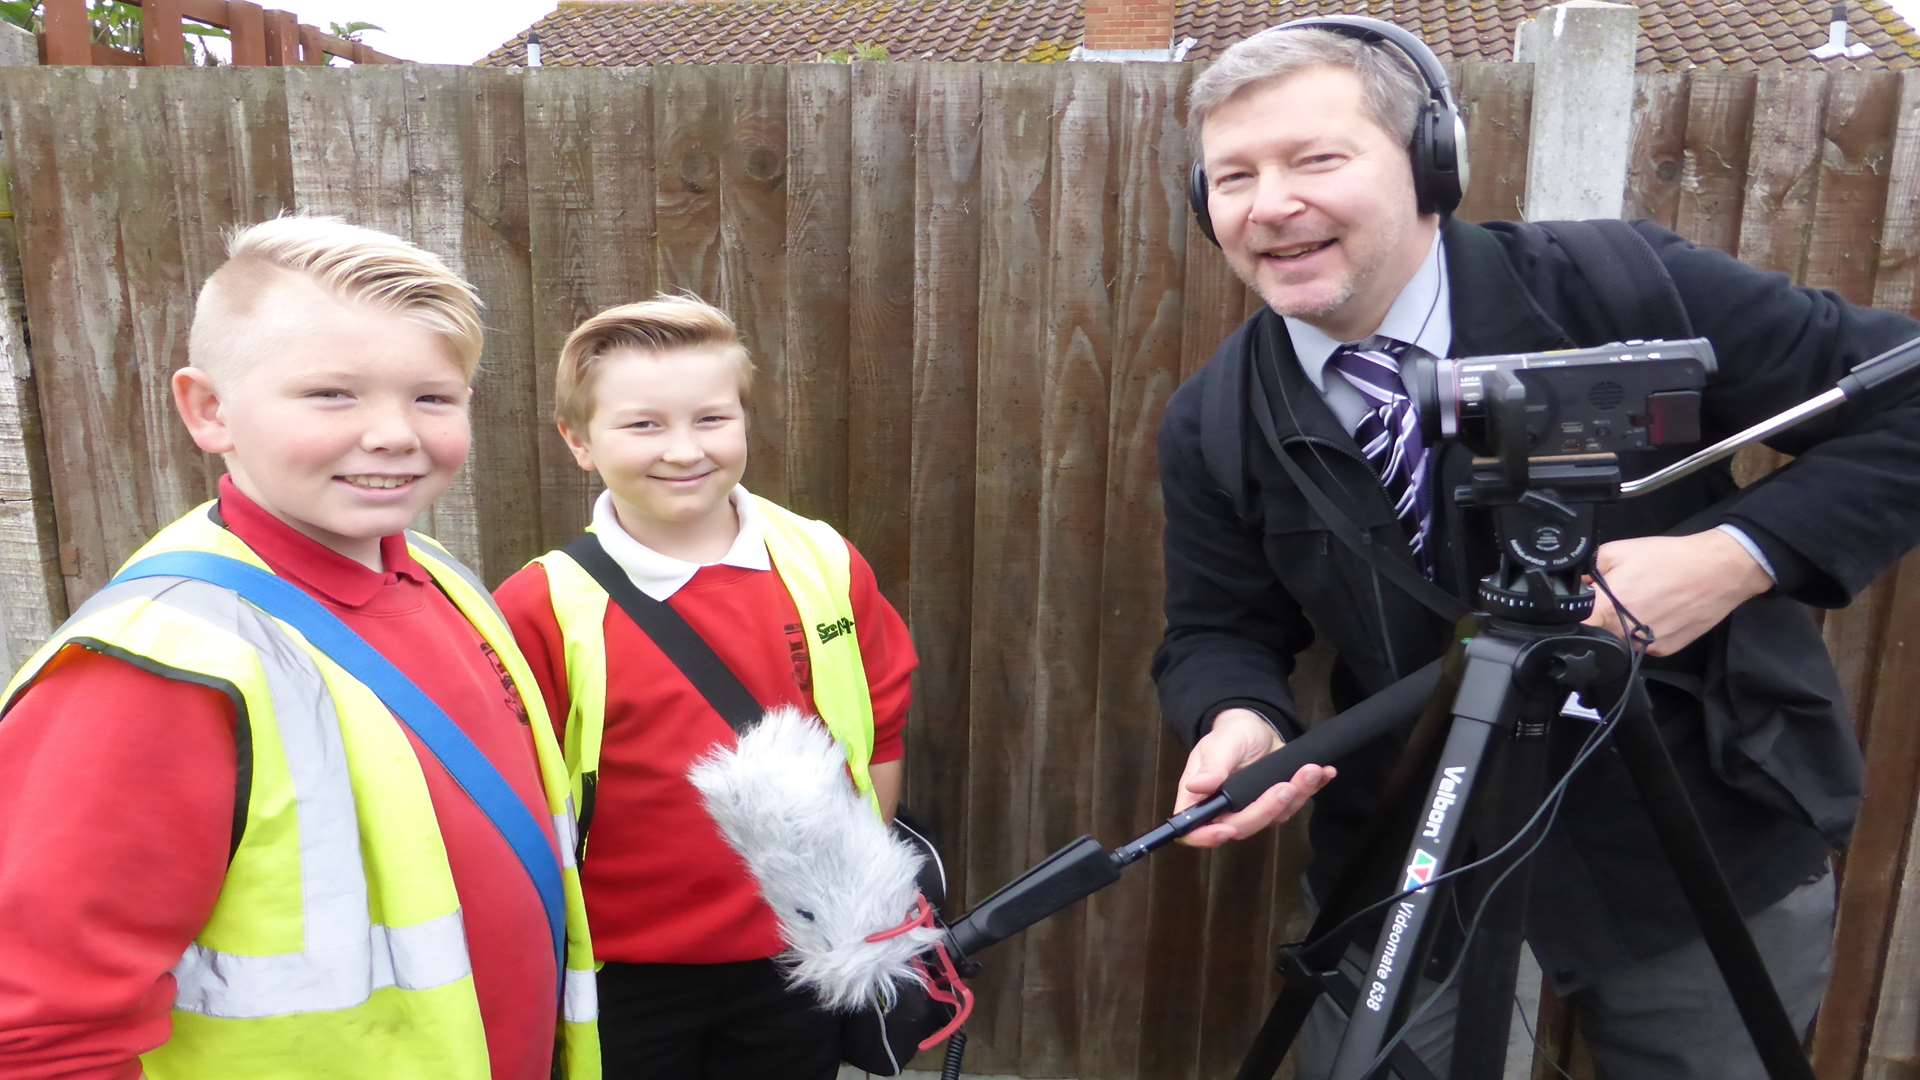 Monkton Primary School's walking bus 10th anniversary celebrations were captured on video by Simon Dolby of KM Walk to School. Pictured with pupils Jasper Marsh and Harry Faulkner, both 10.